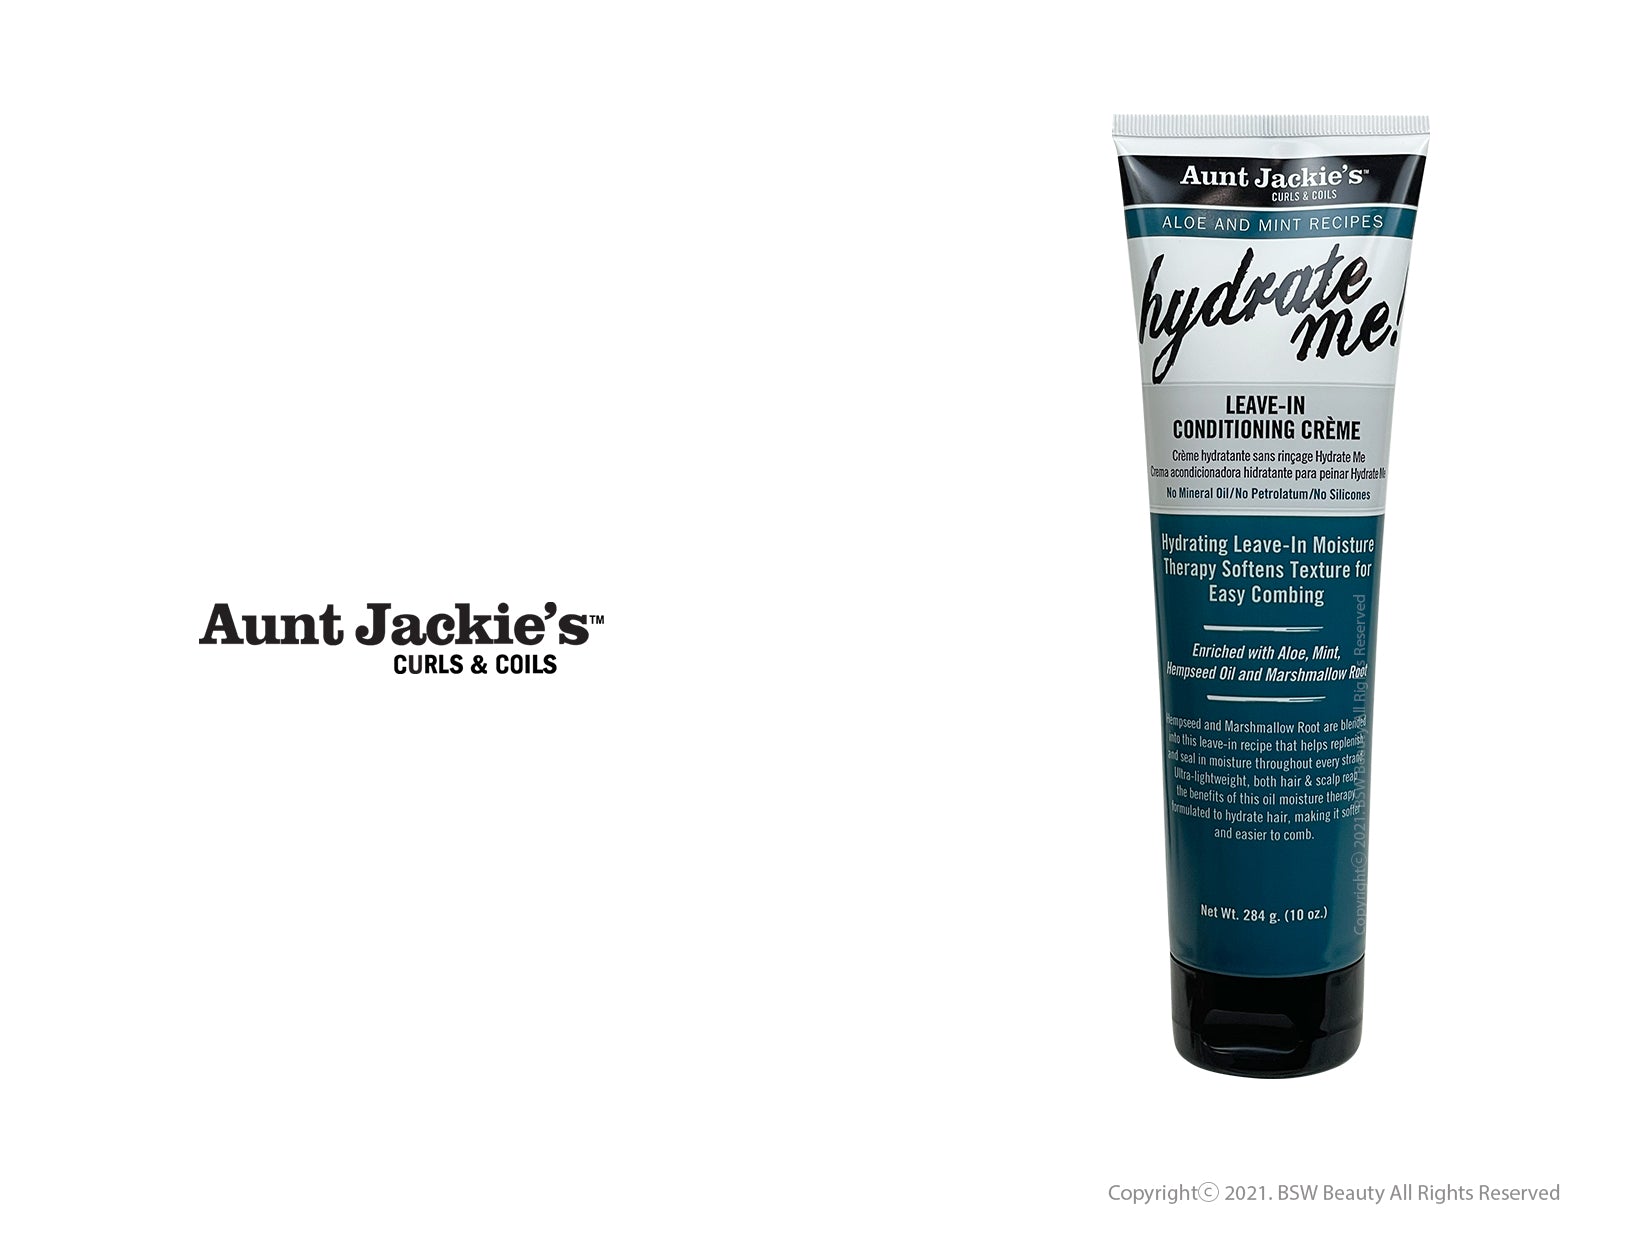 AUNT JACKIE'S ALOE AND MINT HYDRATE ME LEAVE IN CONDITIONING CREME 10oz